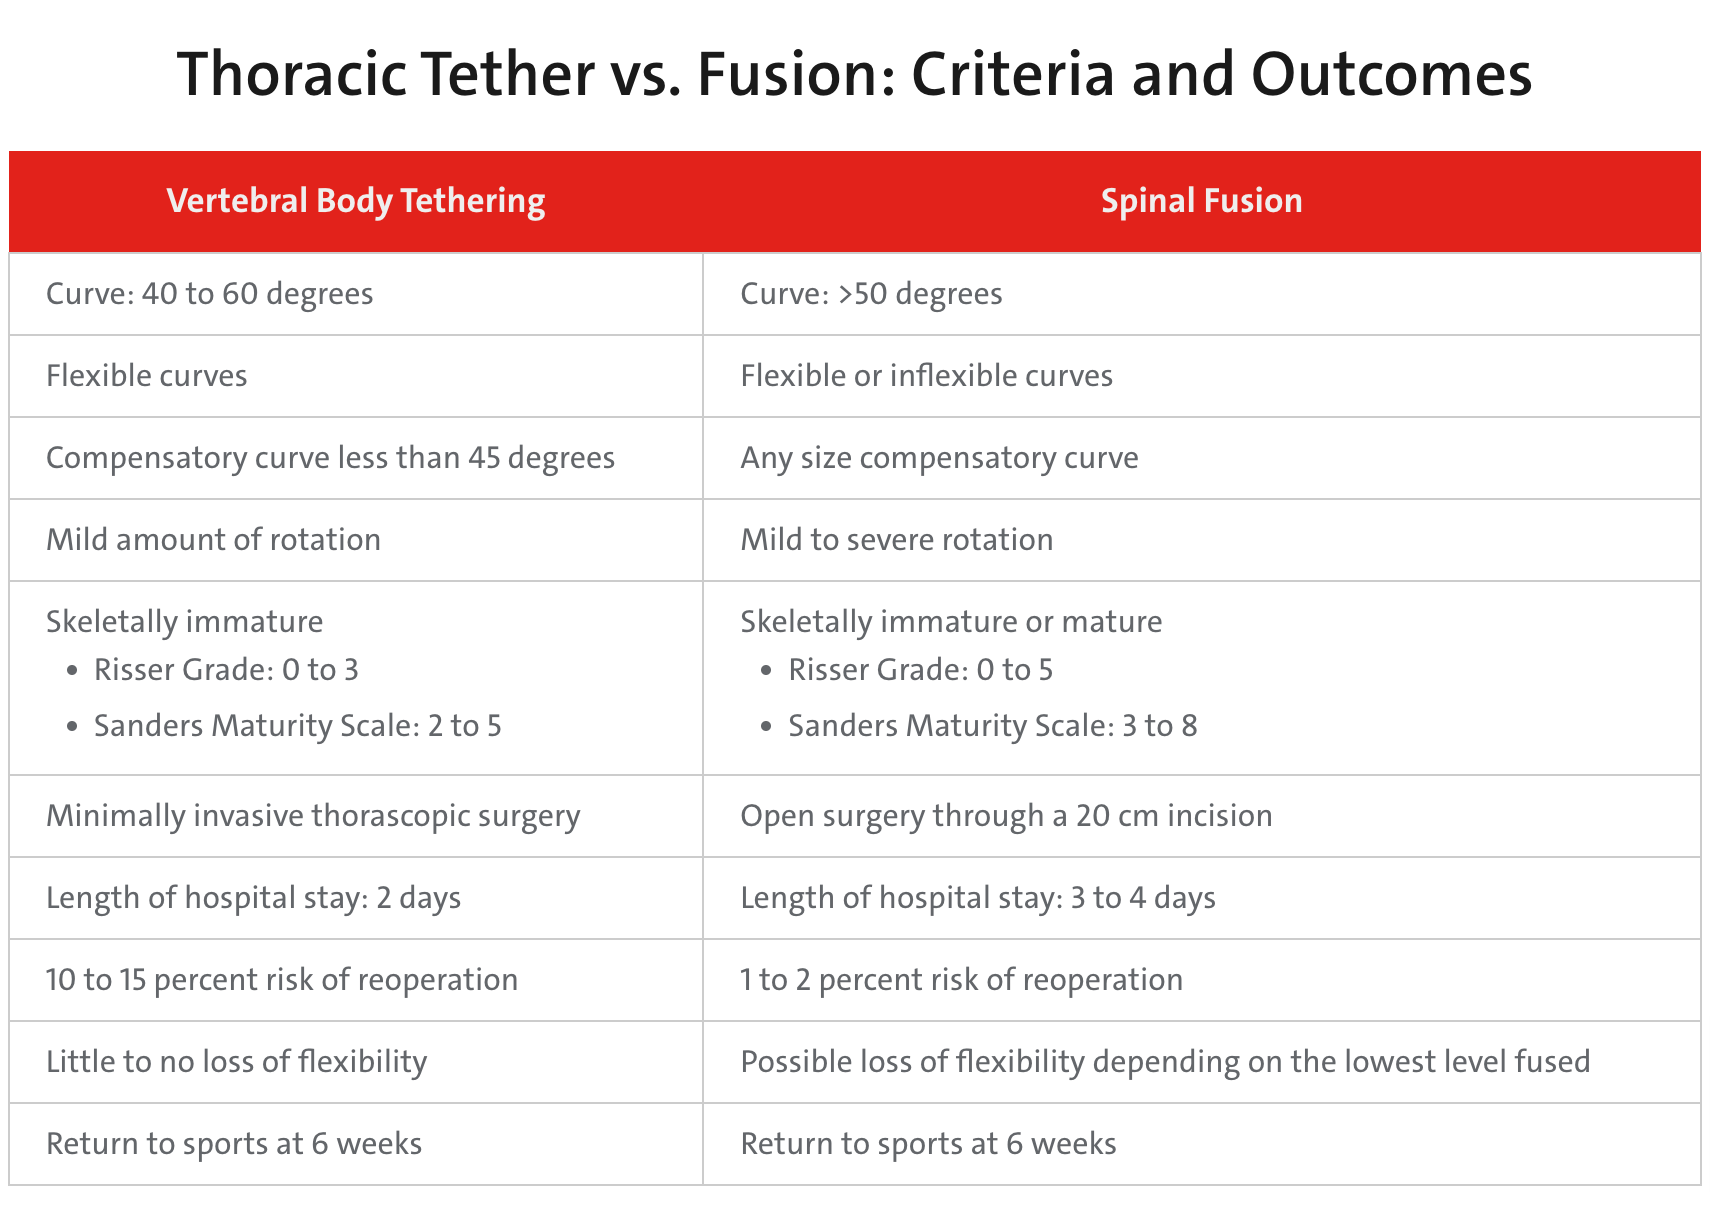 Thoracic Tether vs. Fusion: Criteria and Outcomes Chart